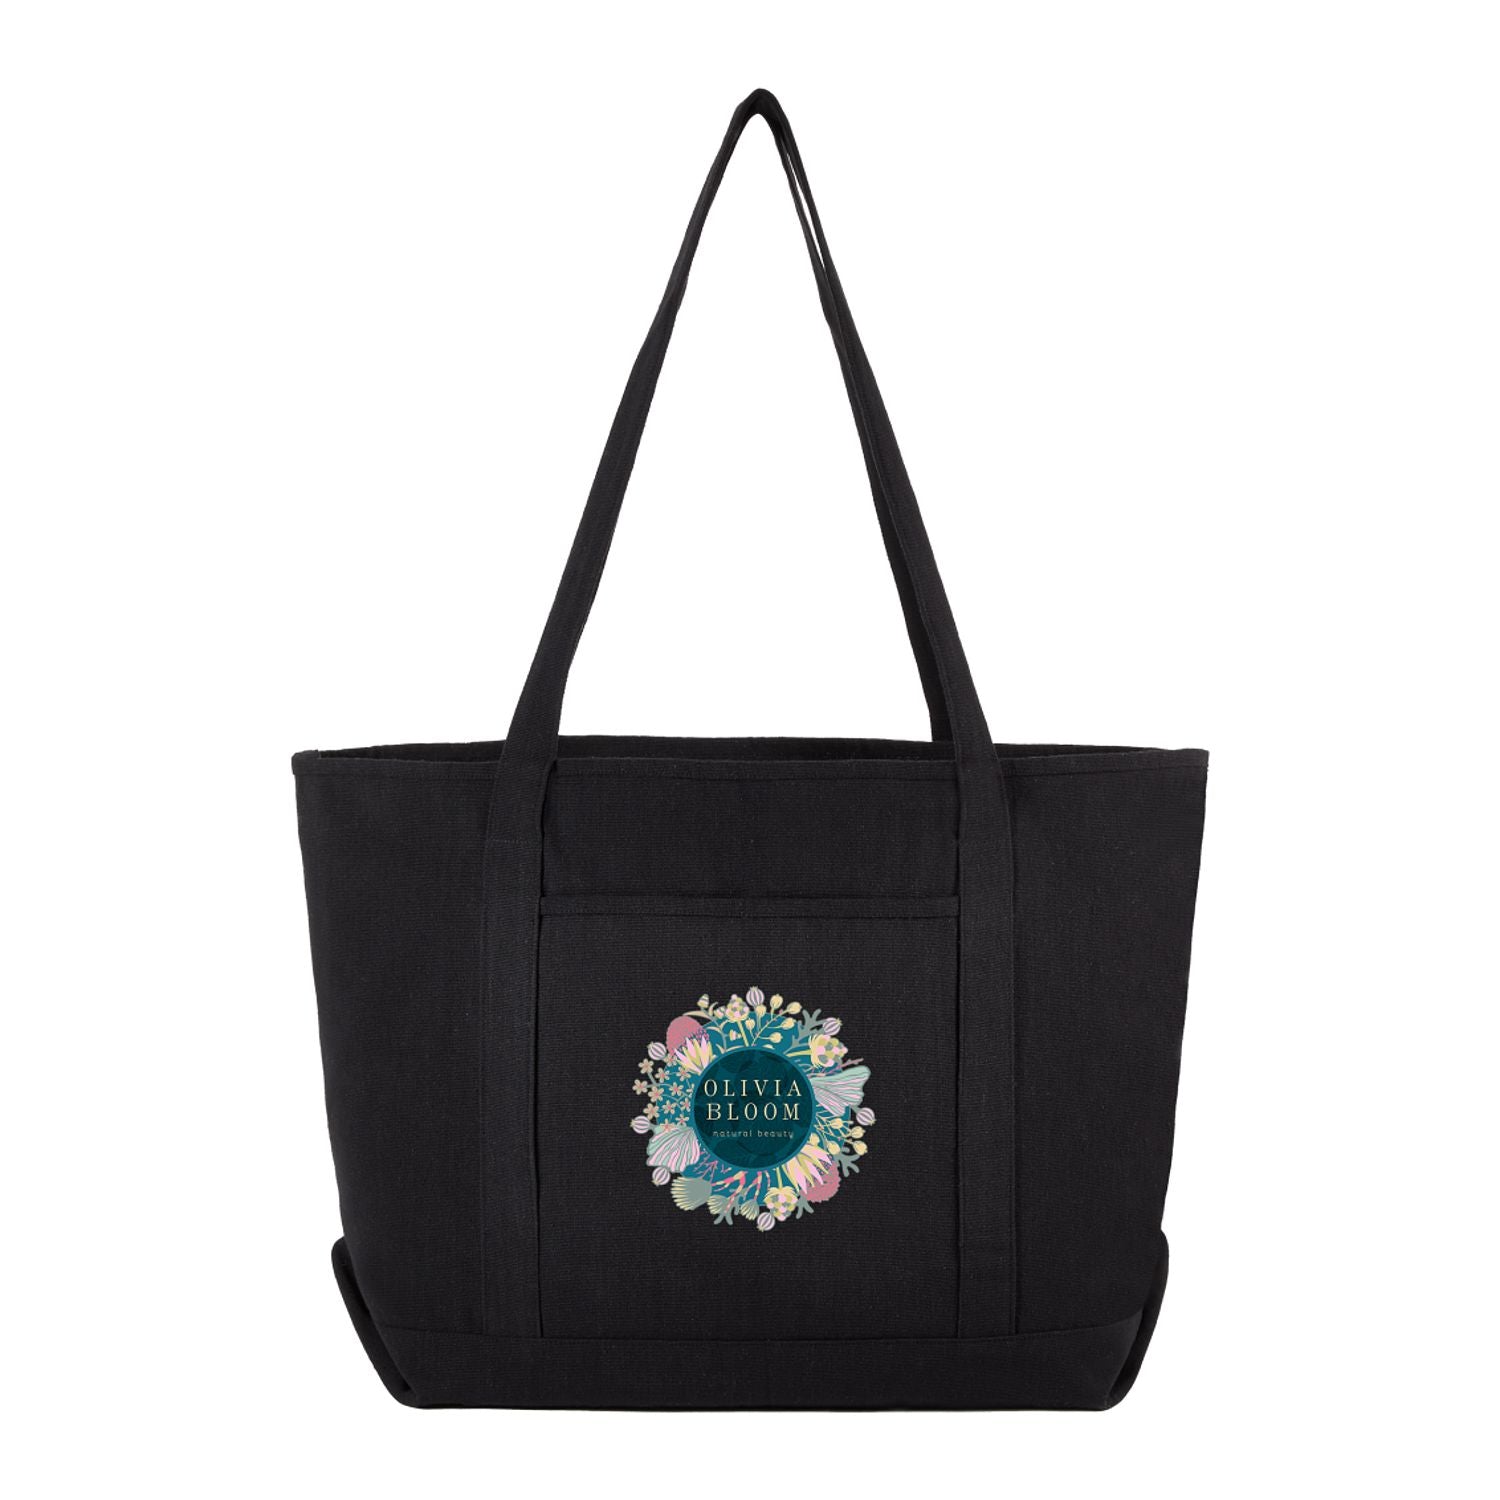 Customizable Repose 10oz Recycled Cotton Boat Tote in black